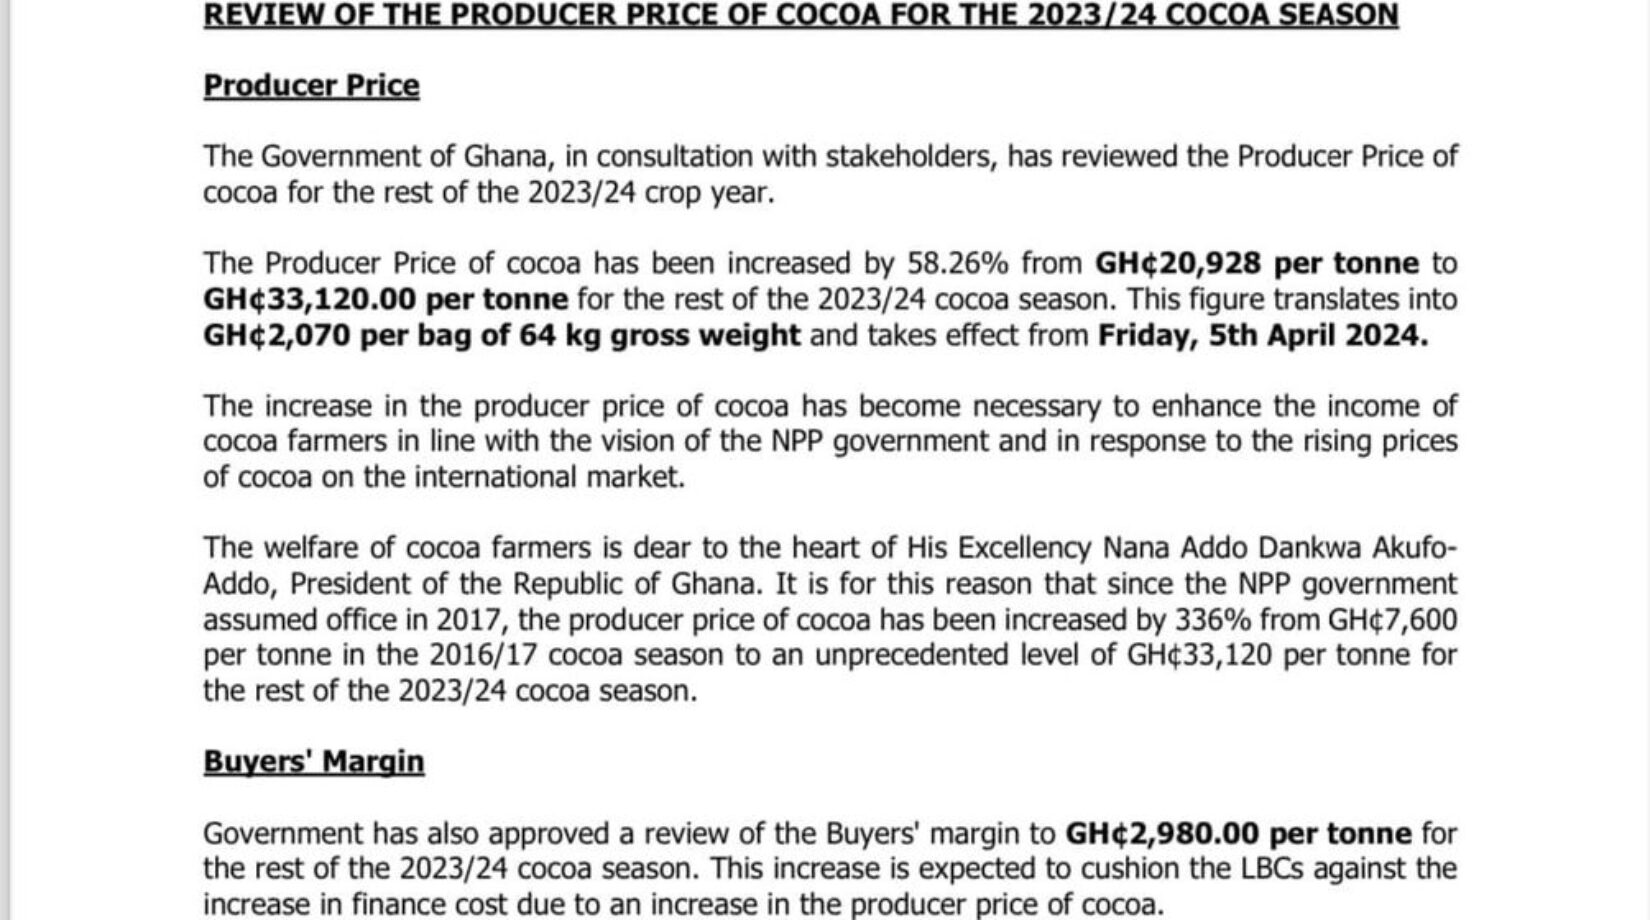 Statement:COCOABOD Increases Producer Price of Cocoa by 58.26%